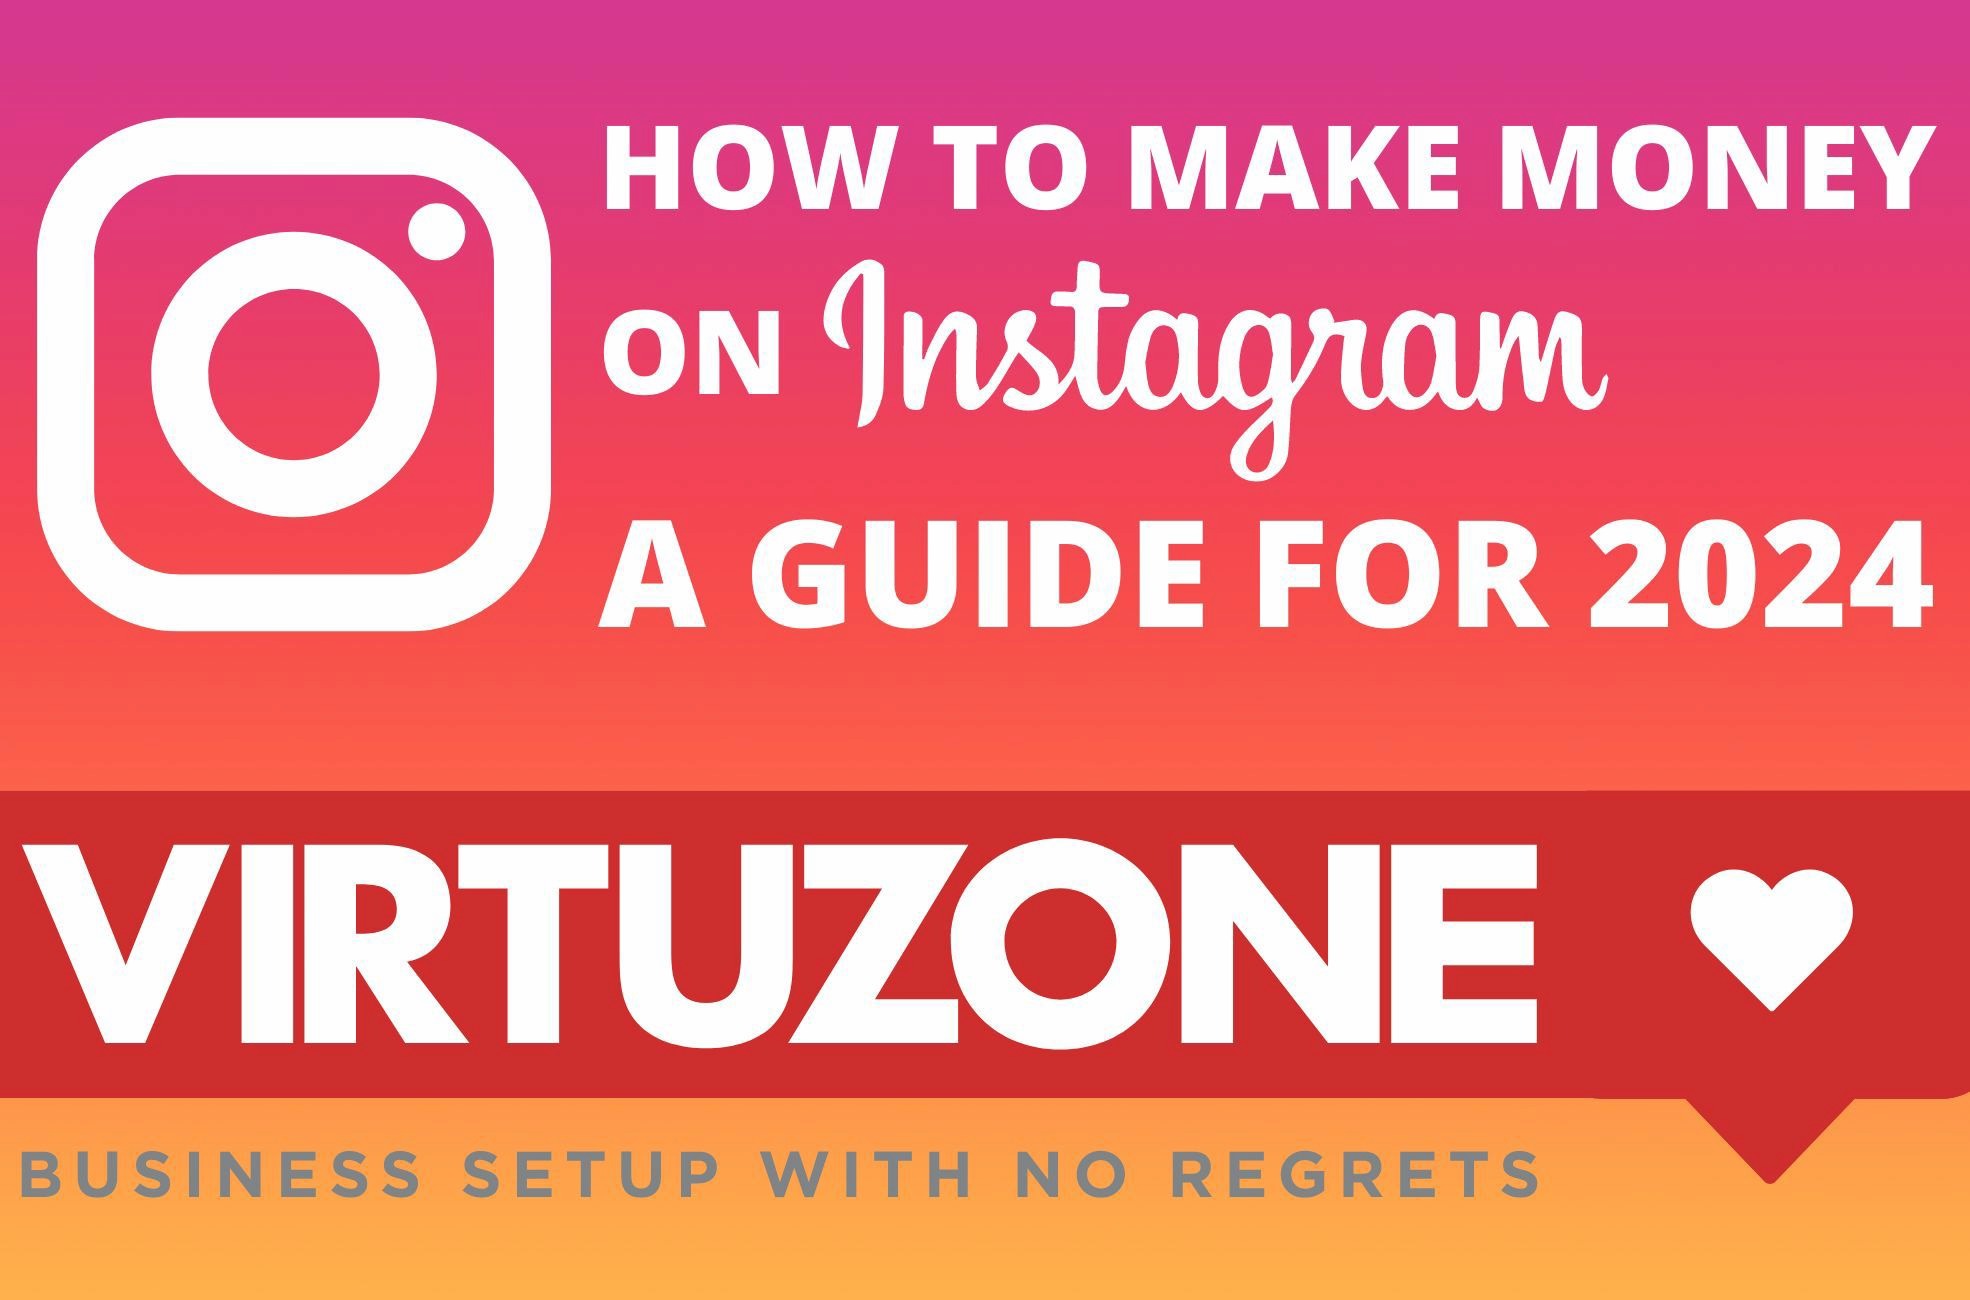 An image with text reading 'How to Make Money on Instagram. A Guide for 2024'.